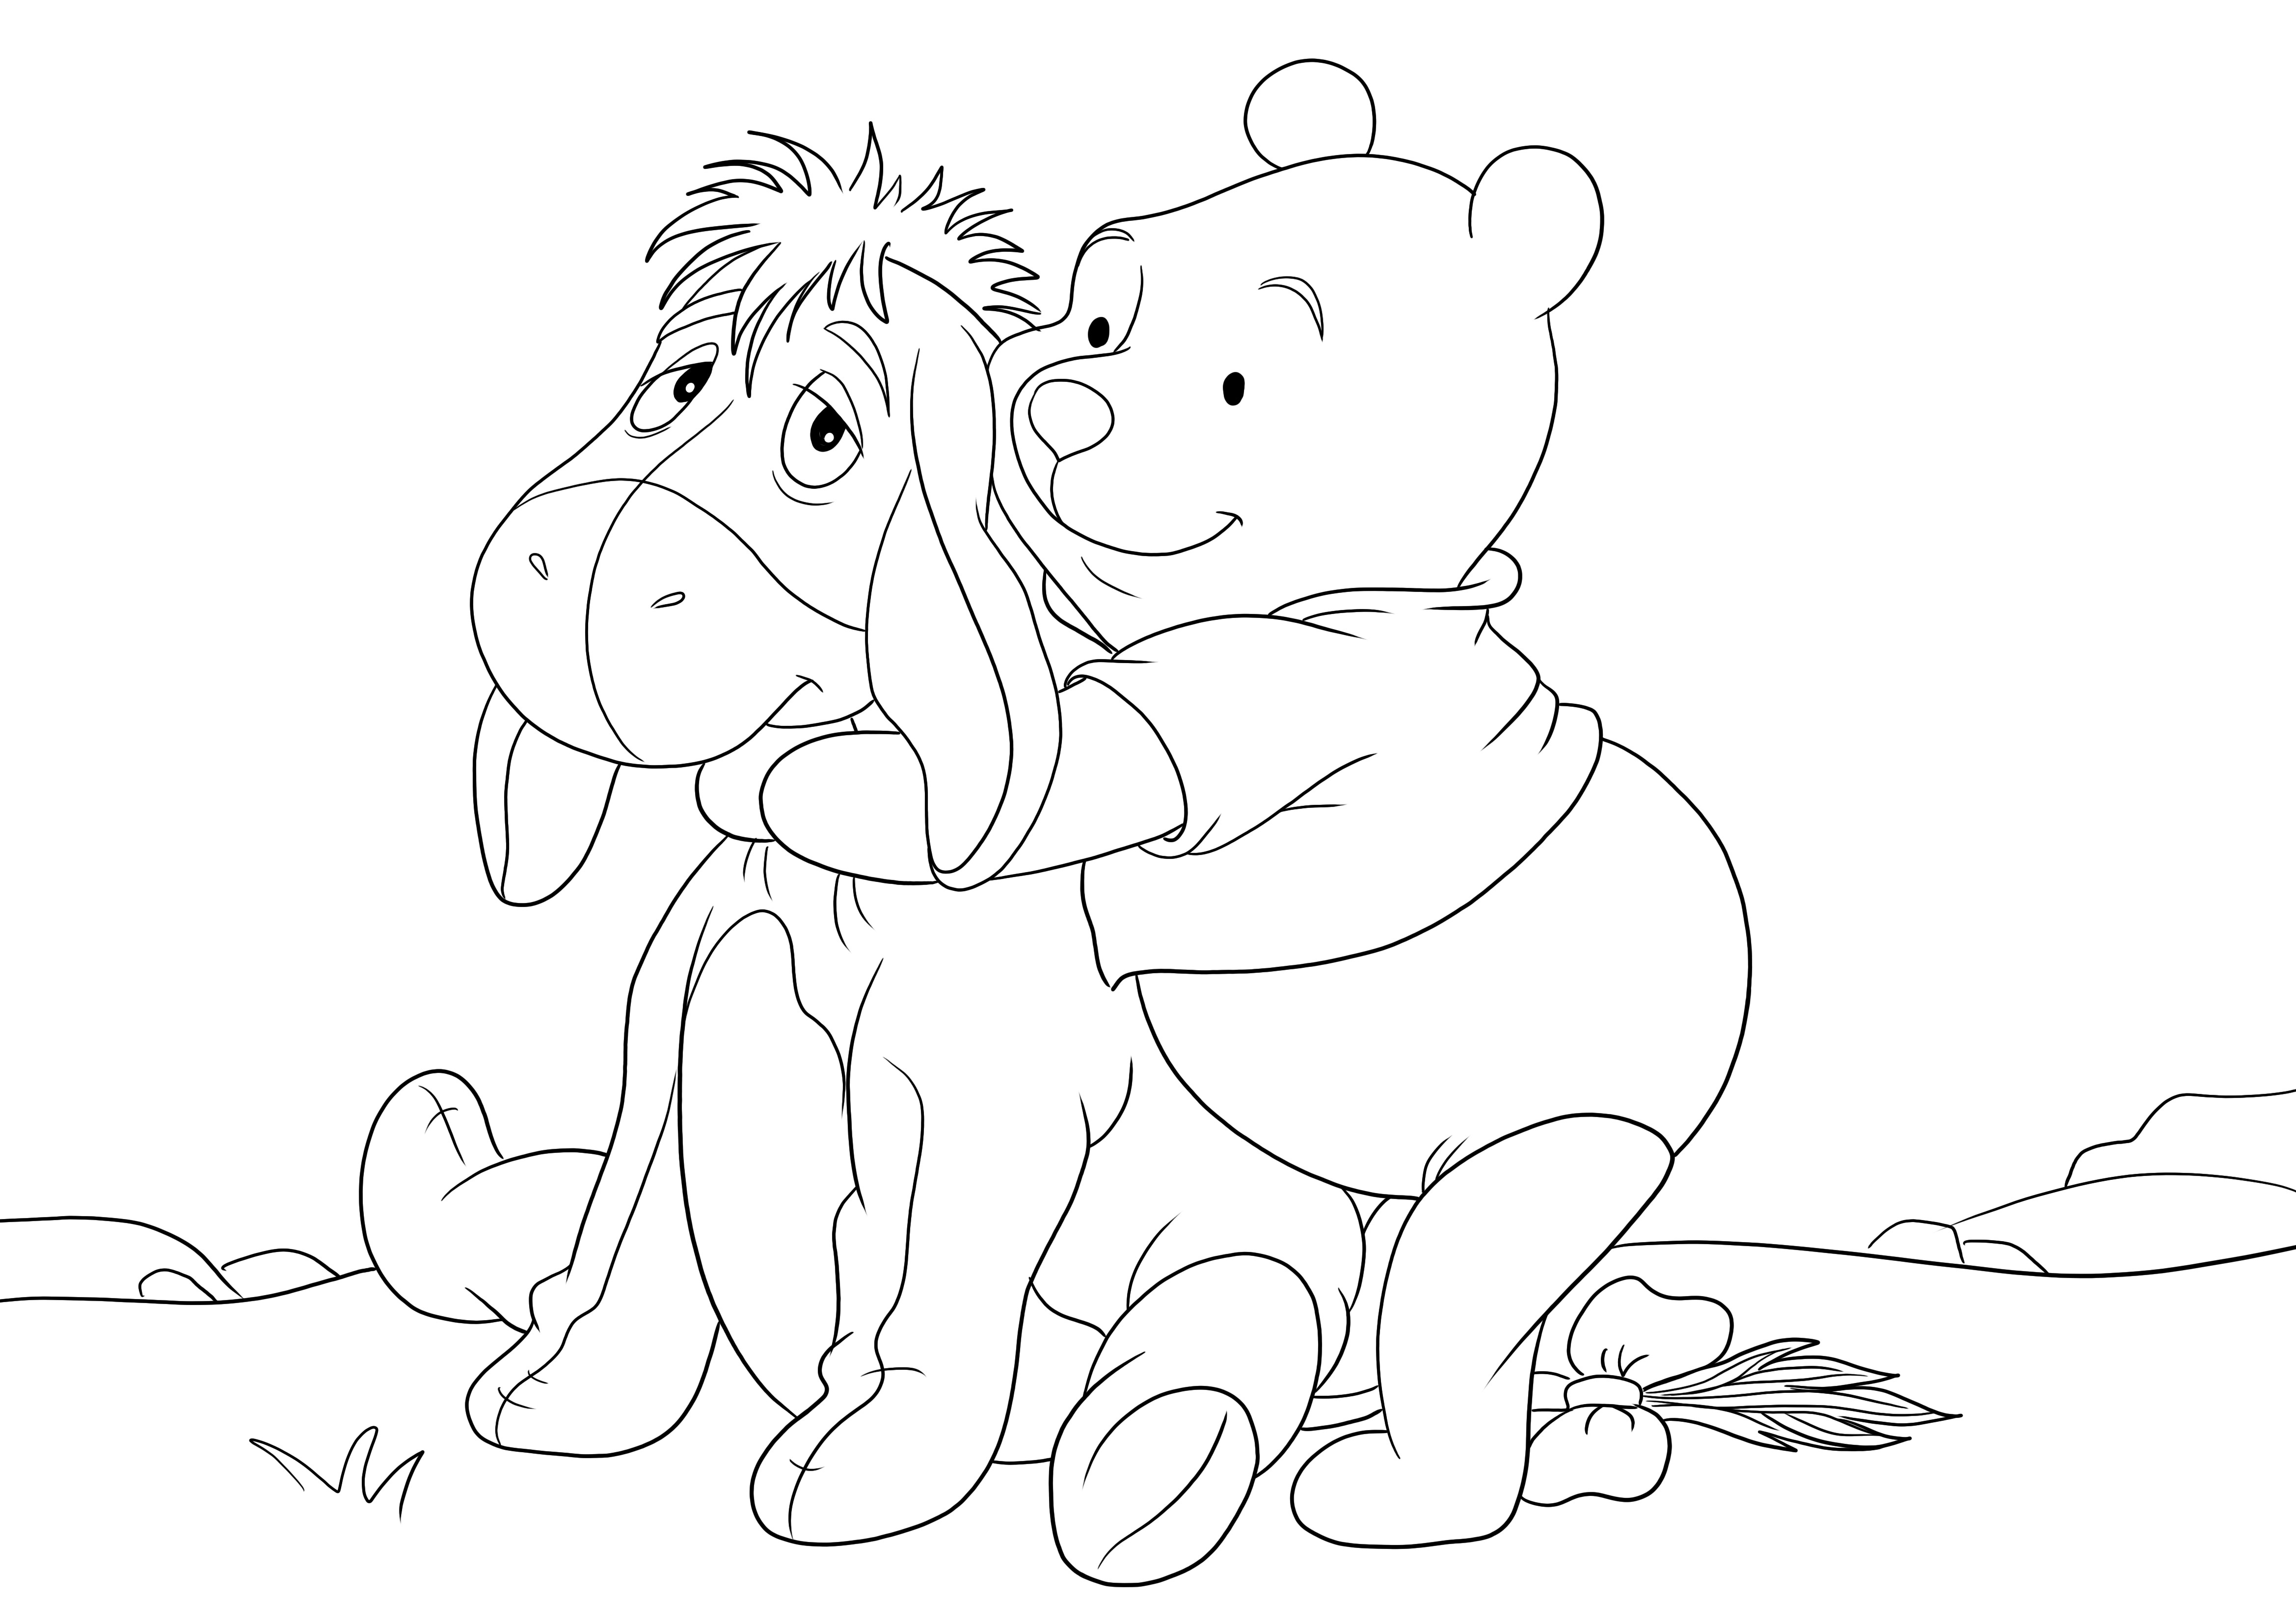 Eeyore and his friend Winnie Pooh easy and free to print or download and color